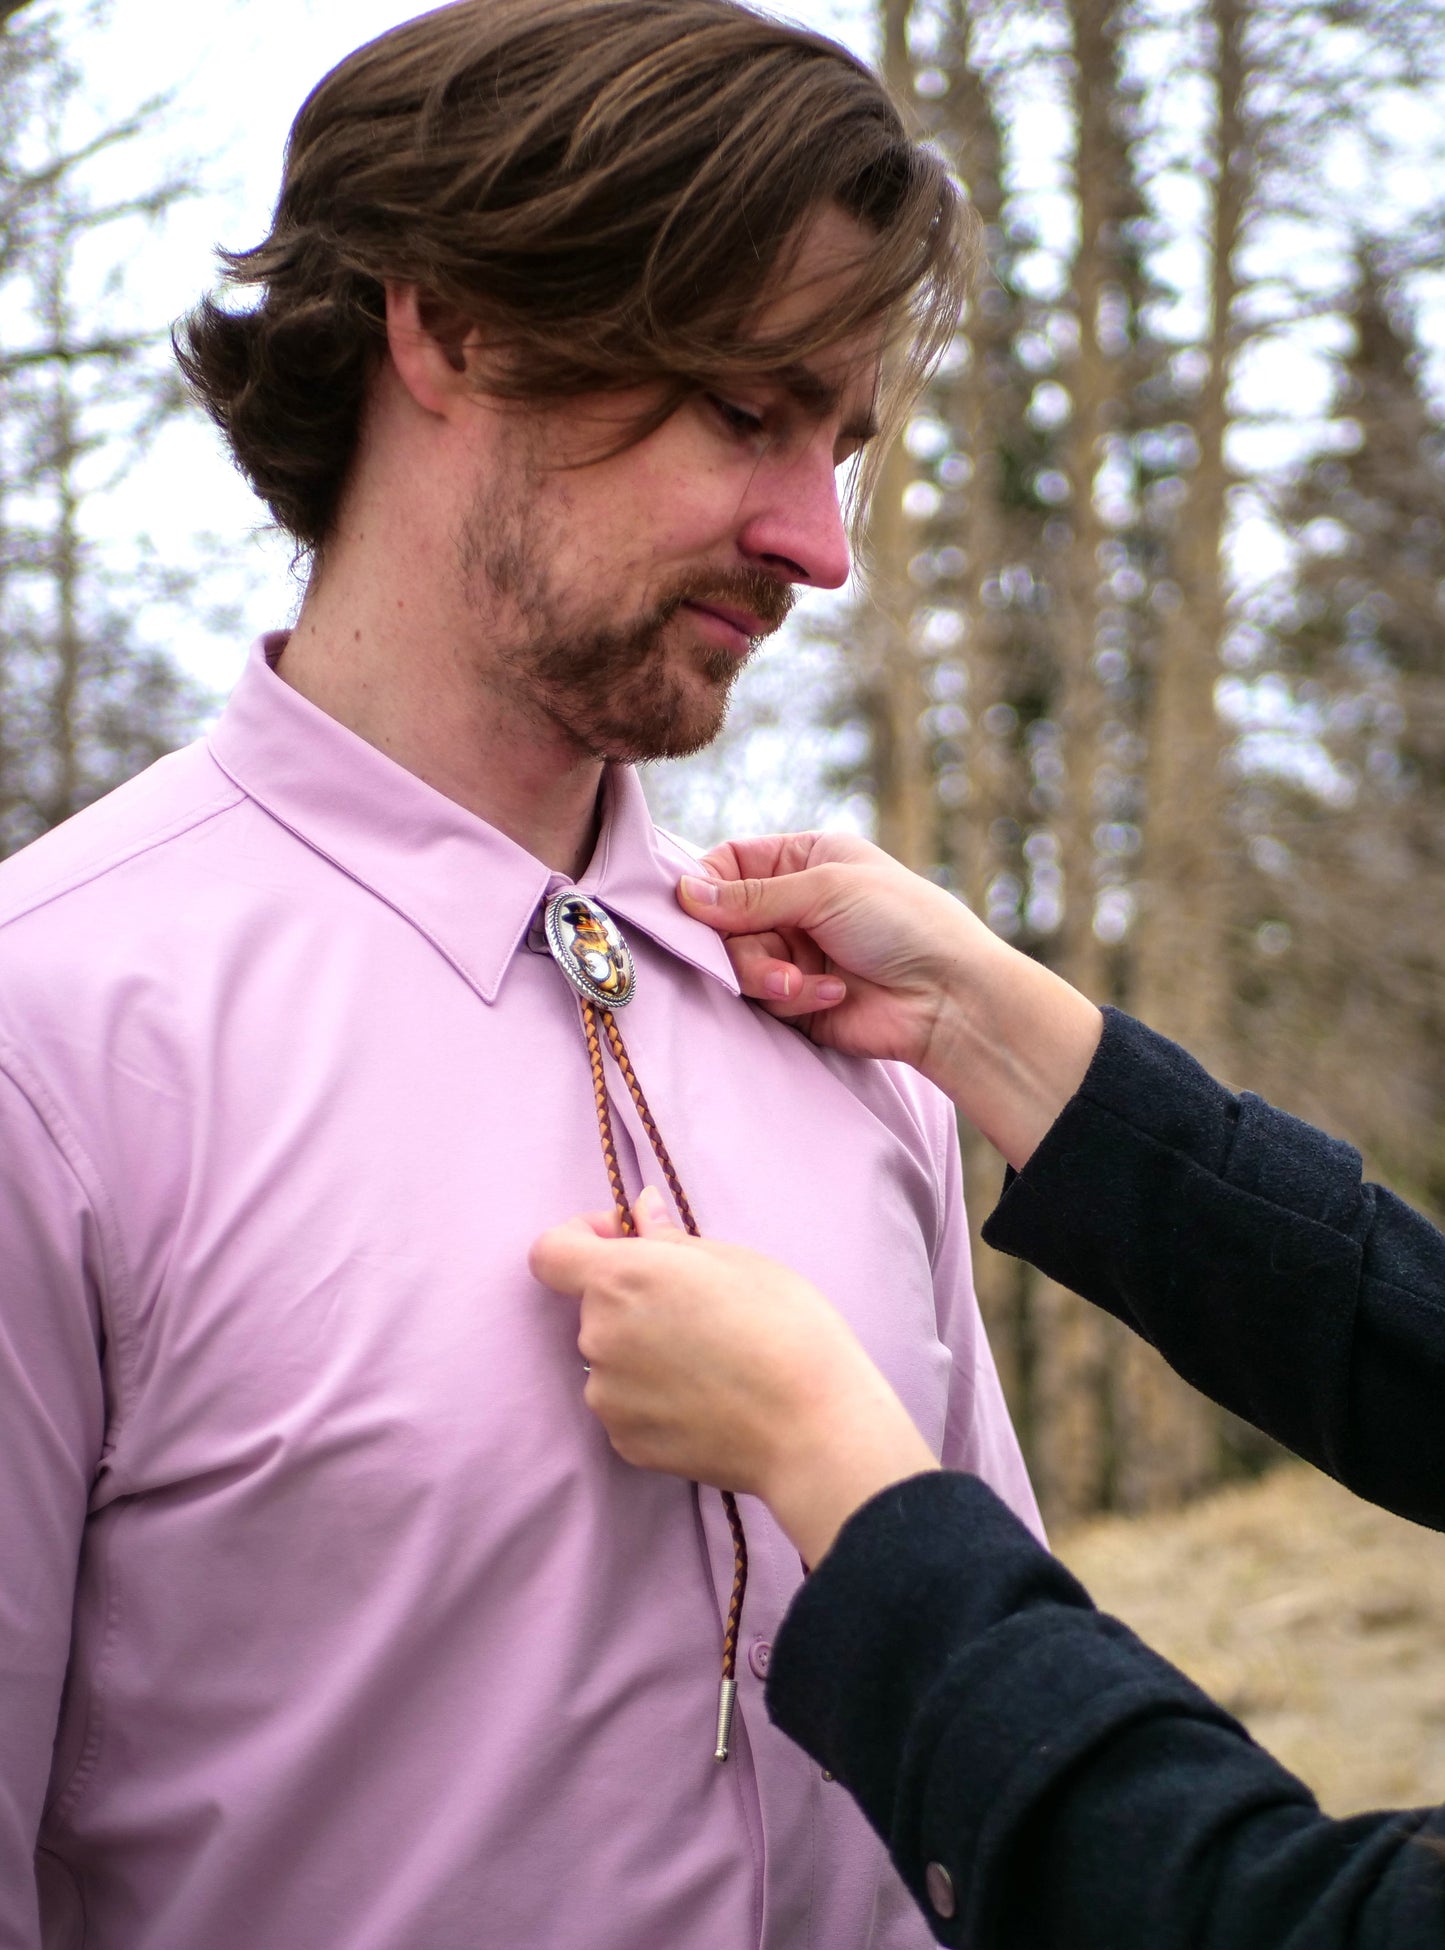 how far down does a bolo tie go? How long should a bolo tie be?